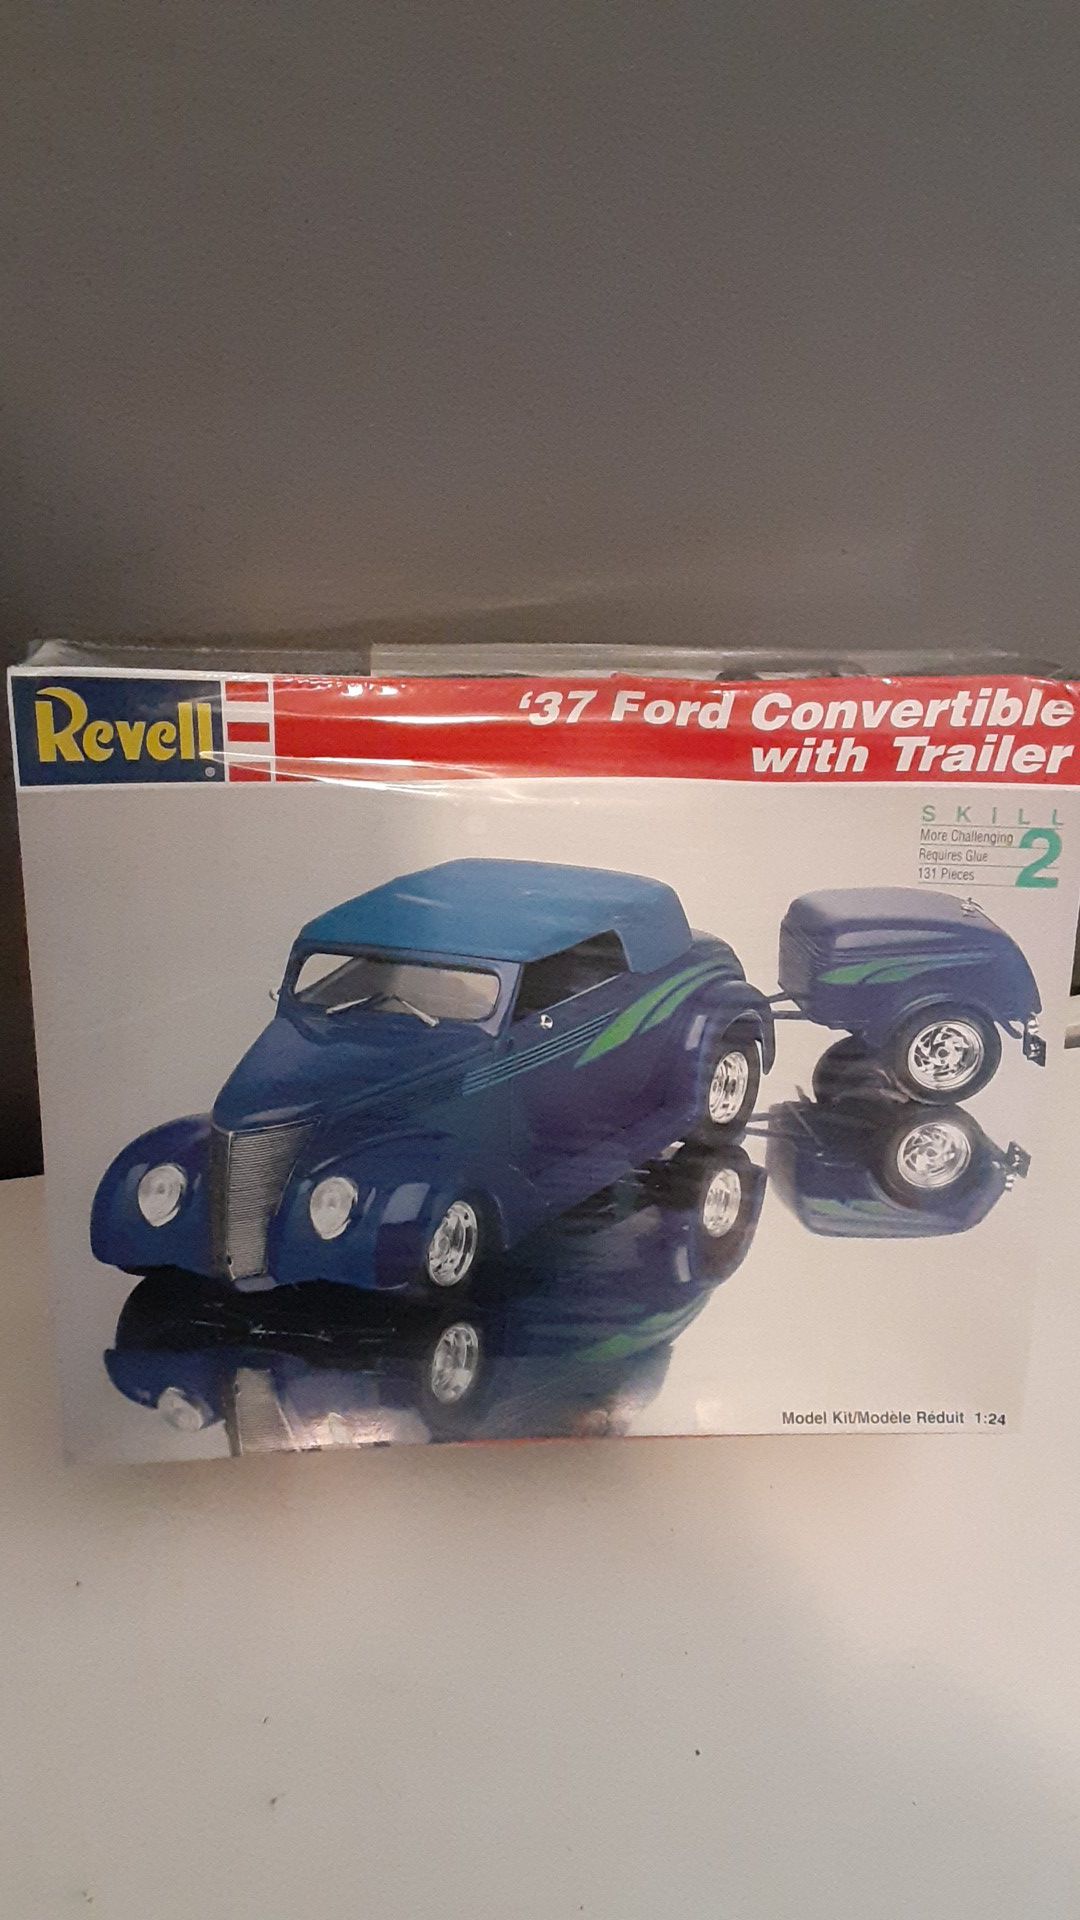 37 ford convertible with trailer/model cars/model kits/37 ford/hot rod/classic cars/revell kits